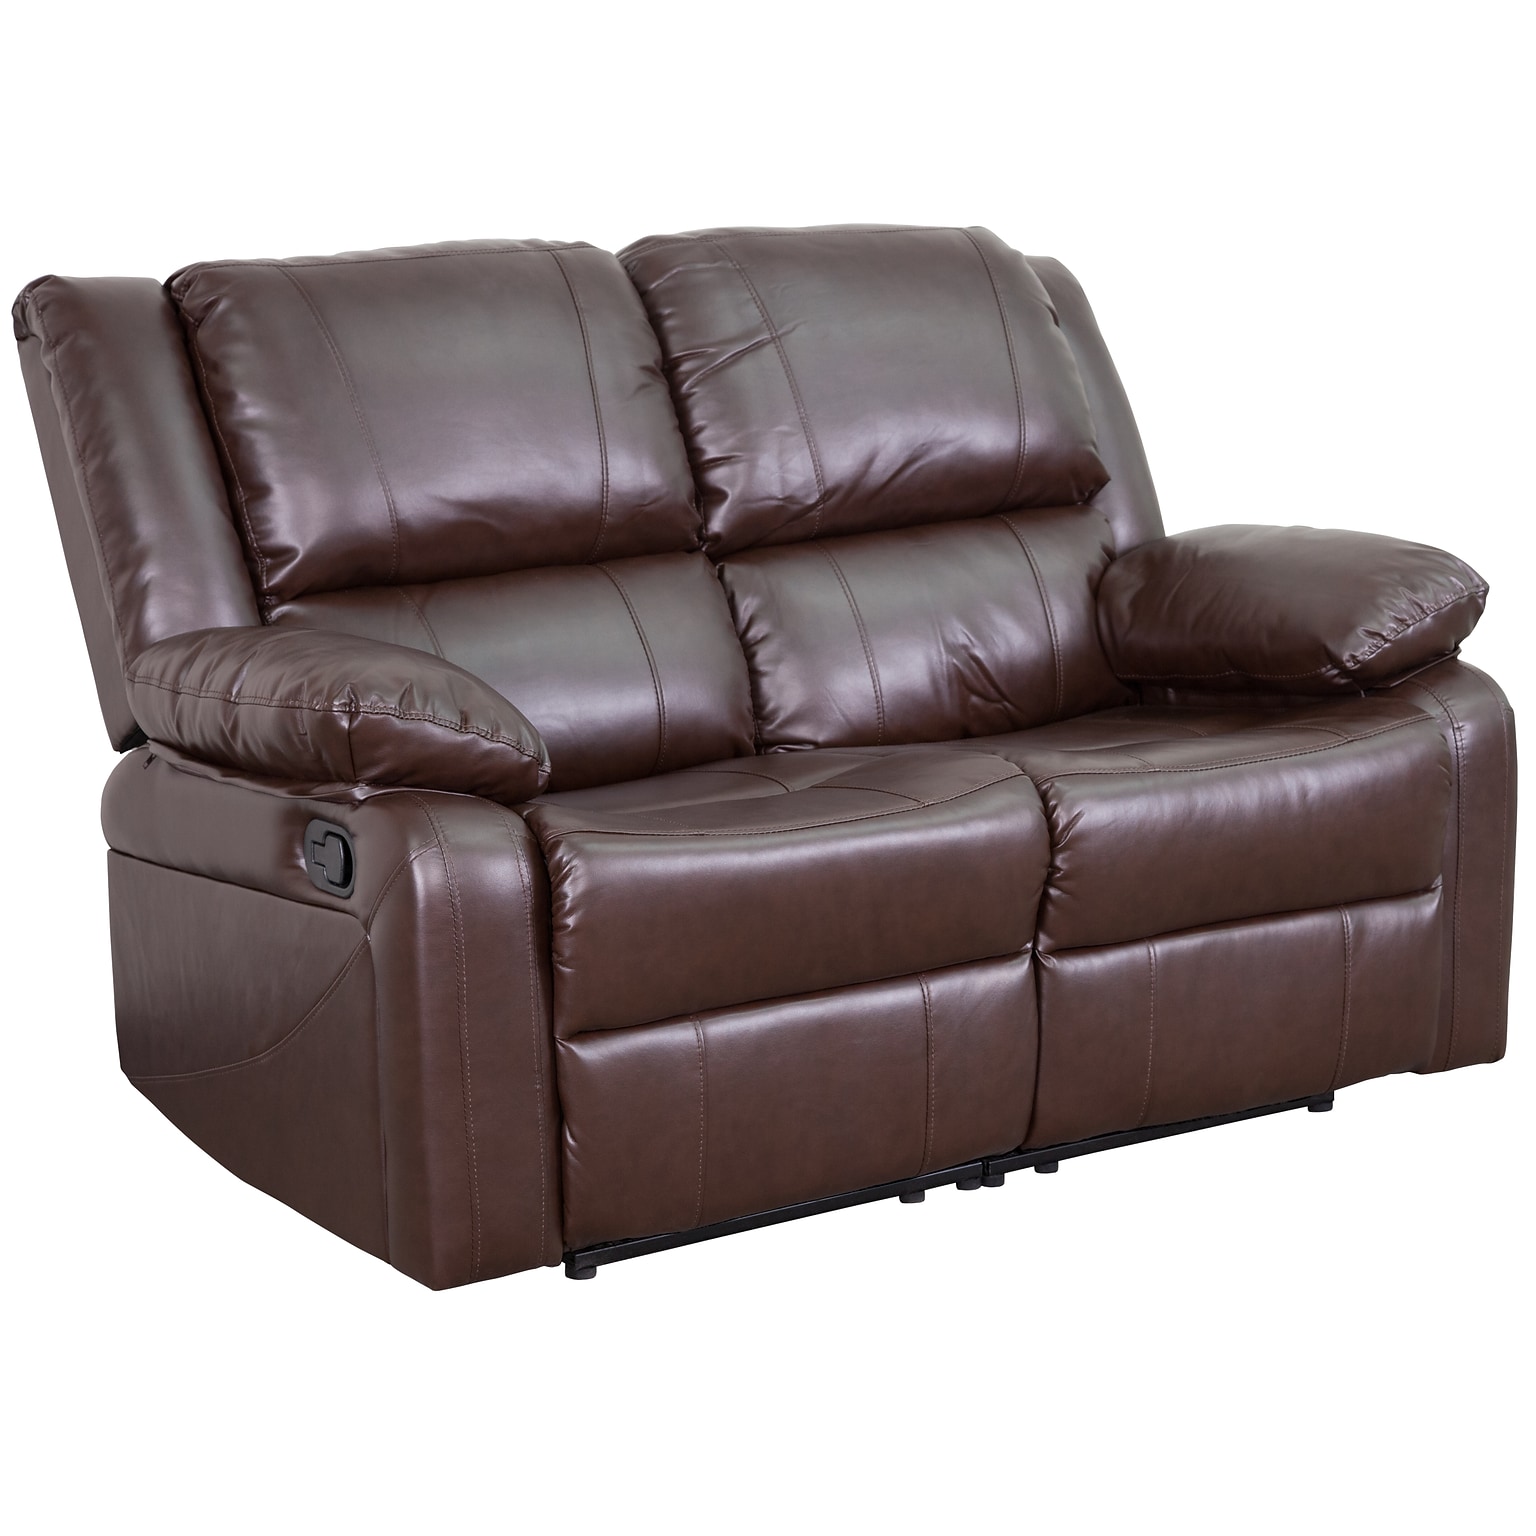 Flash Furniture Harmony Series 56 LeatherSoft Loveseat with Two Built-In Recliners, Brown (BT70597LSBN)